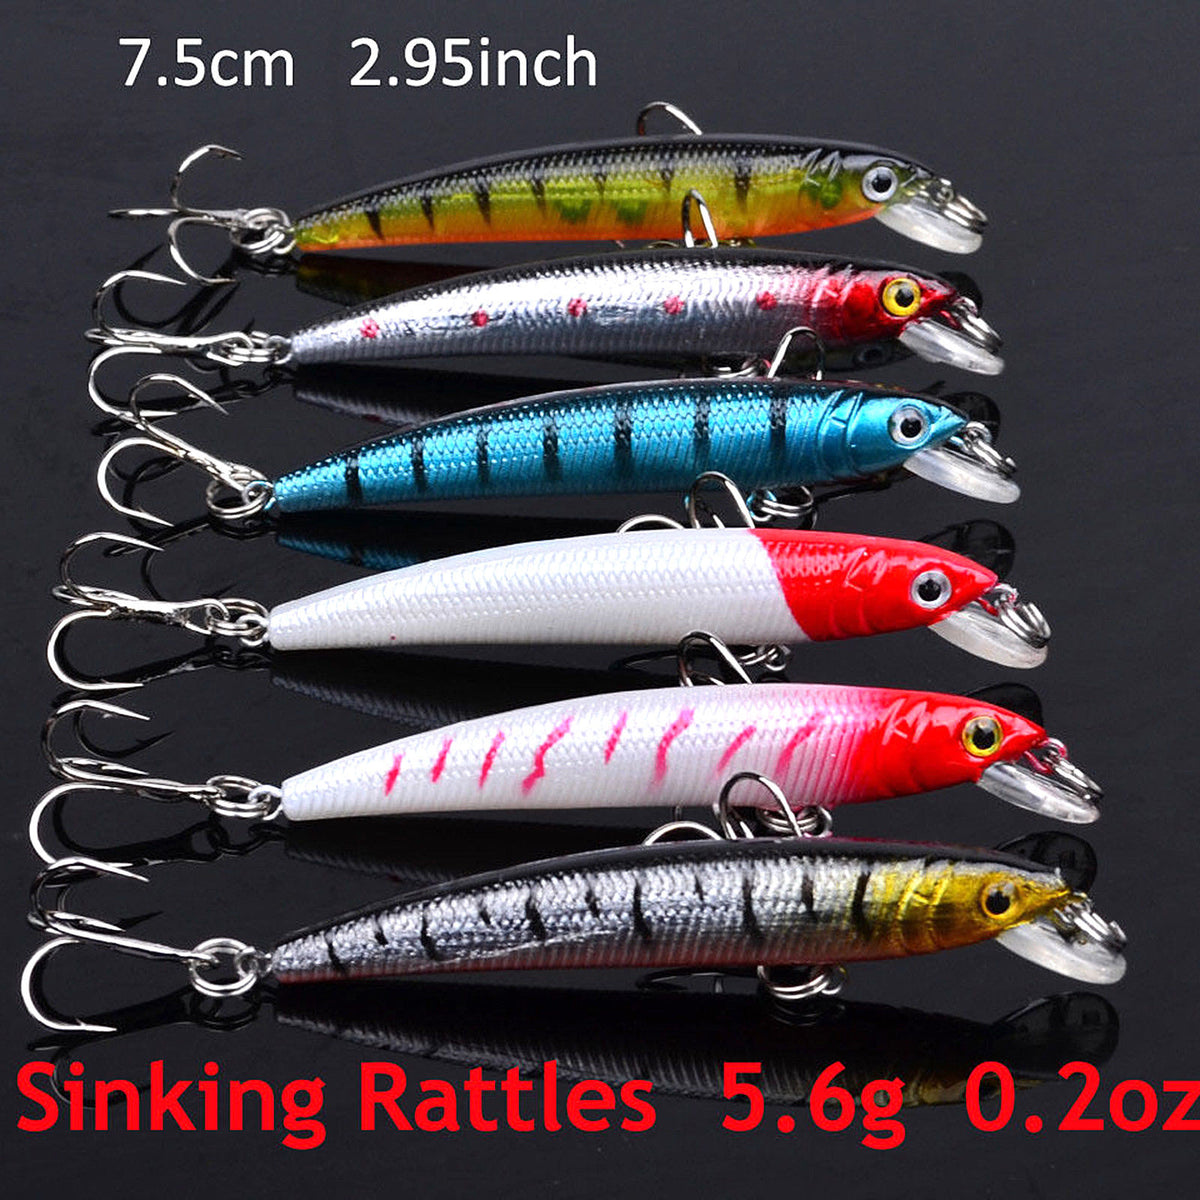 Thirsty's SUPER LURE DEAL - 43 Crank Bait Minnow Lures – Thirsty Buyer